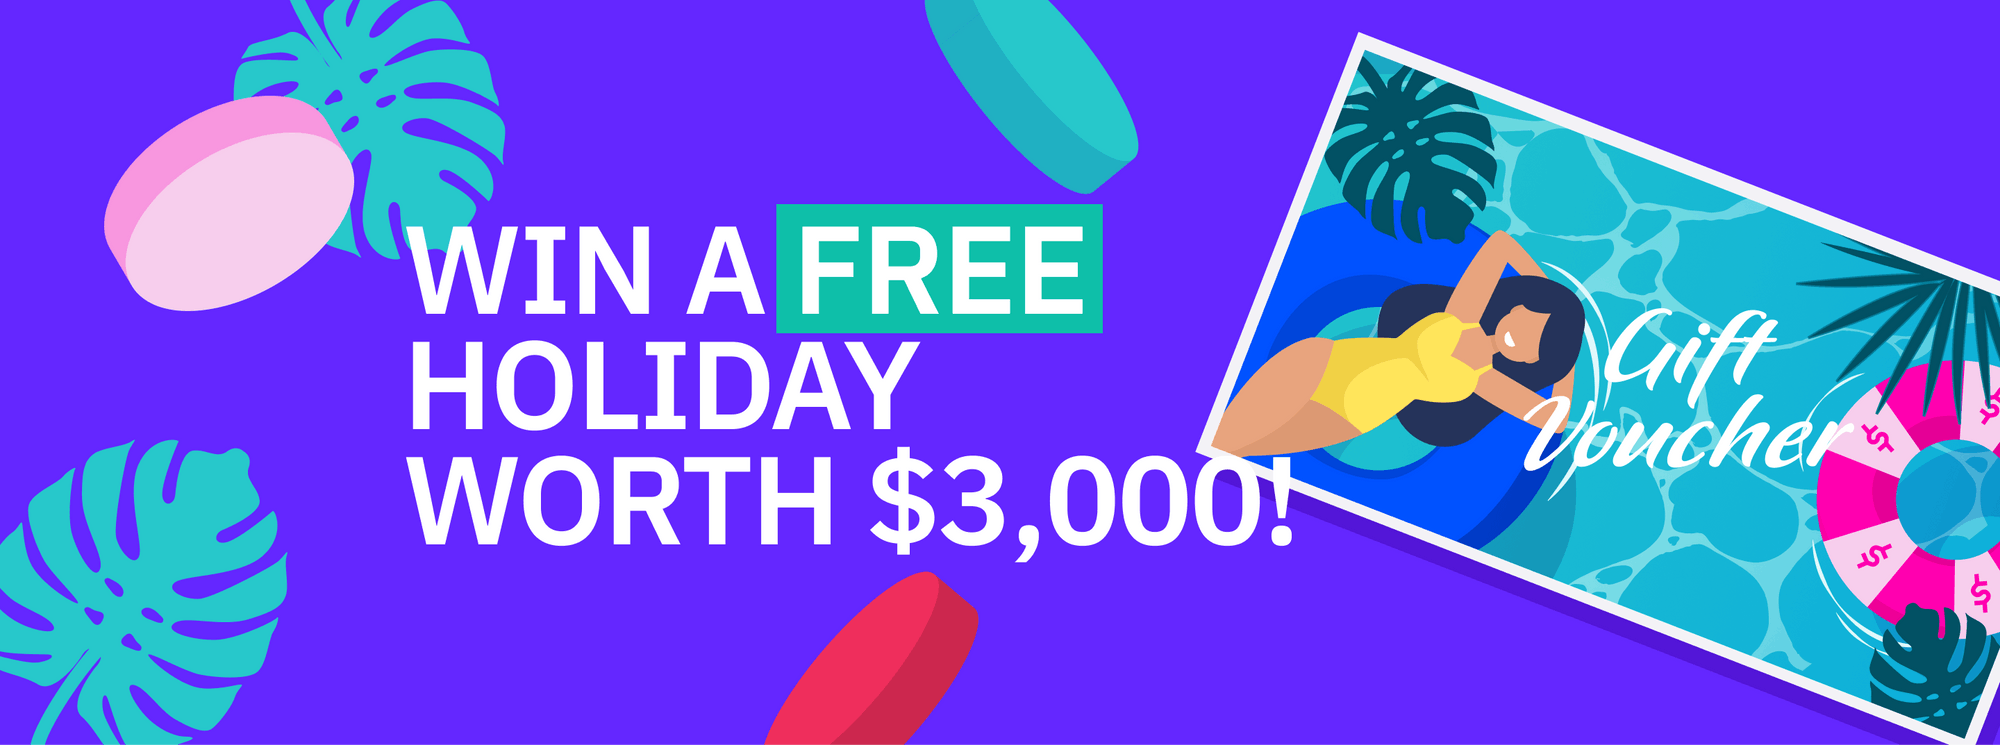 WIN A FREE HOLIDAY WORTH $3,000! Join Our “dAsset Liquidity Mining Promo”